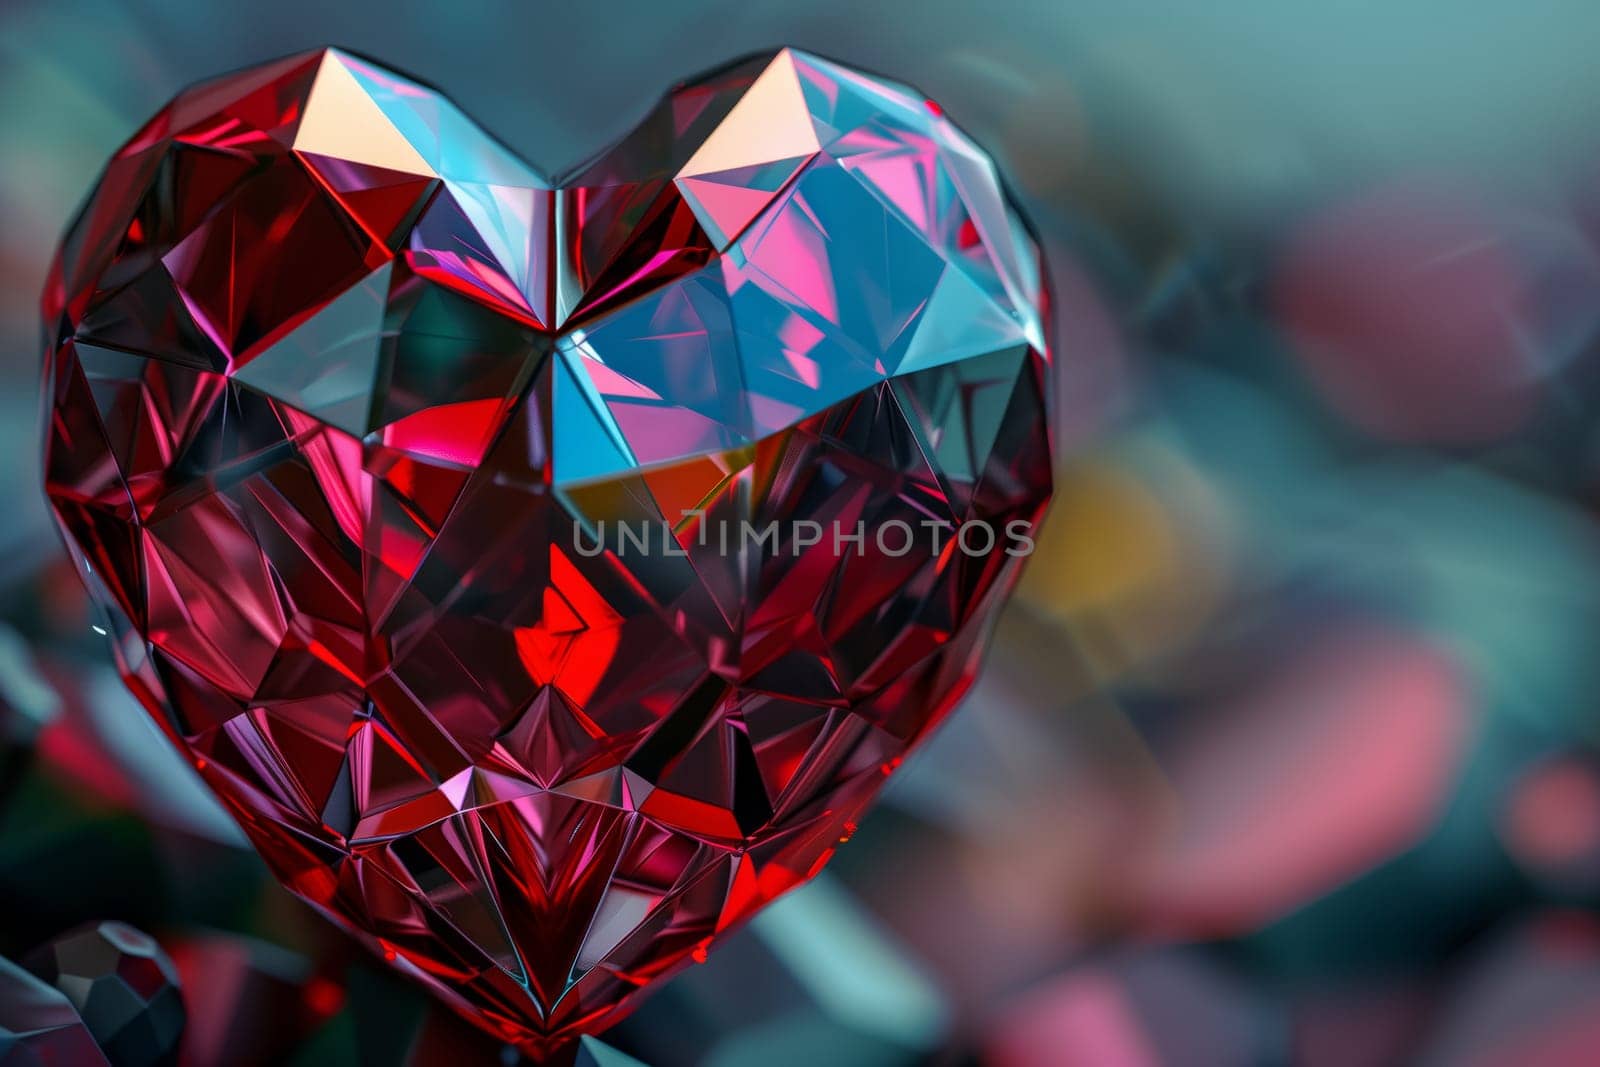 A closeup of a red heartshaped diamond with a creative arts pattern resembling petals in magenta and electric blue, showcasing craft and symmetry as an ornate ornament